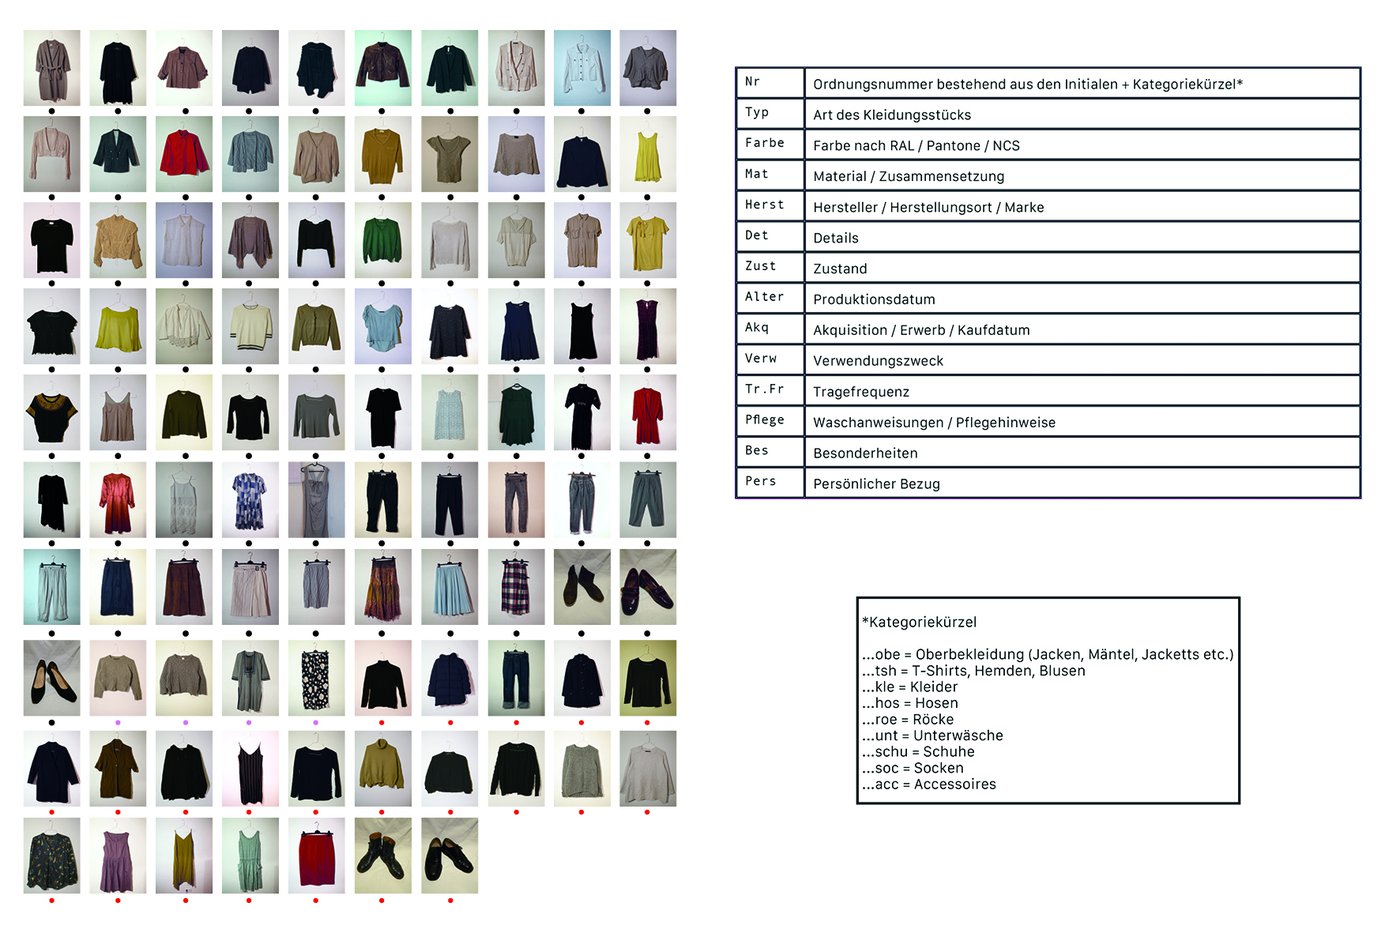 Double-paged picture: left side: many small pictures of clothes in the gridPicture on the right side: Inventory table with different categories and explanations